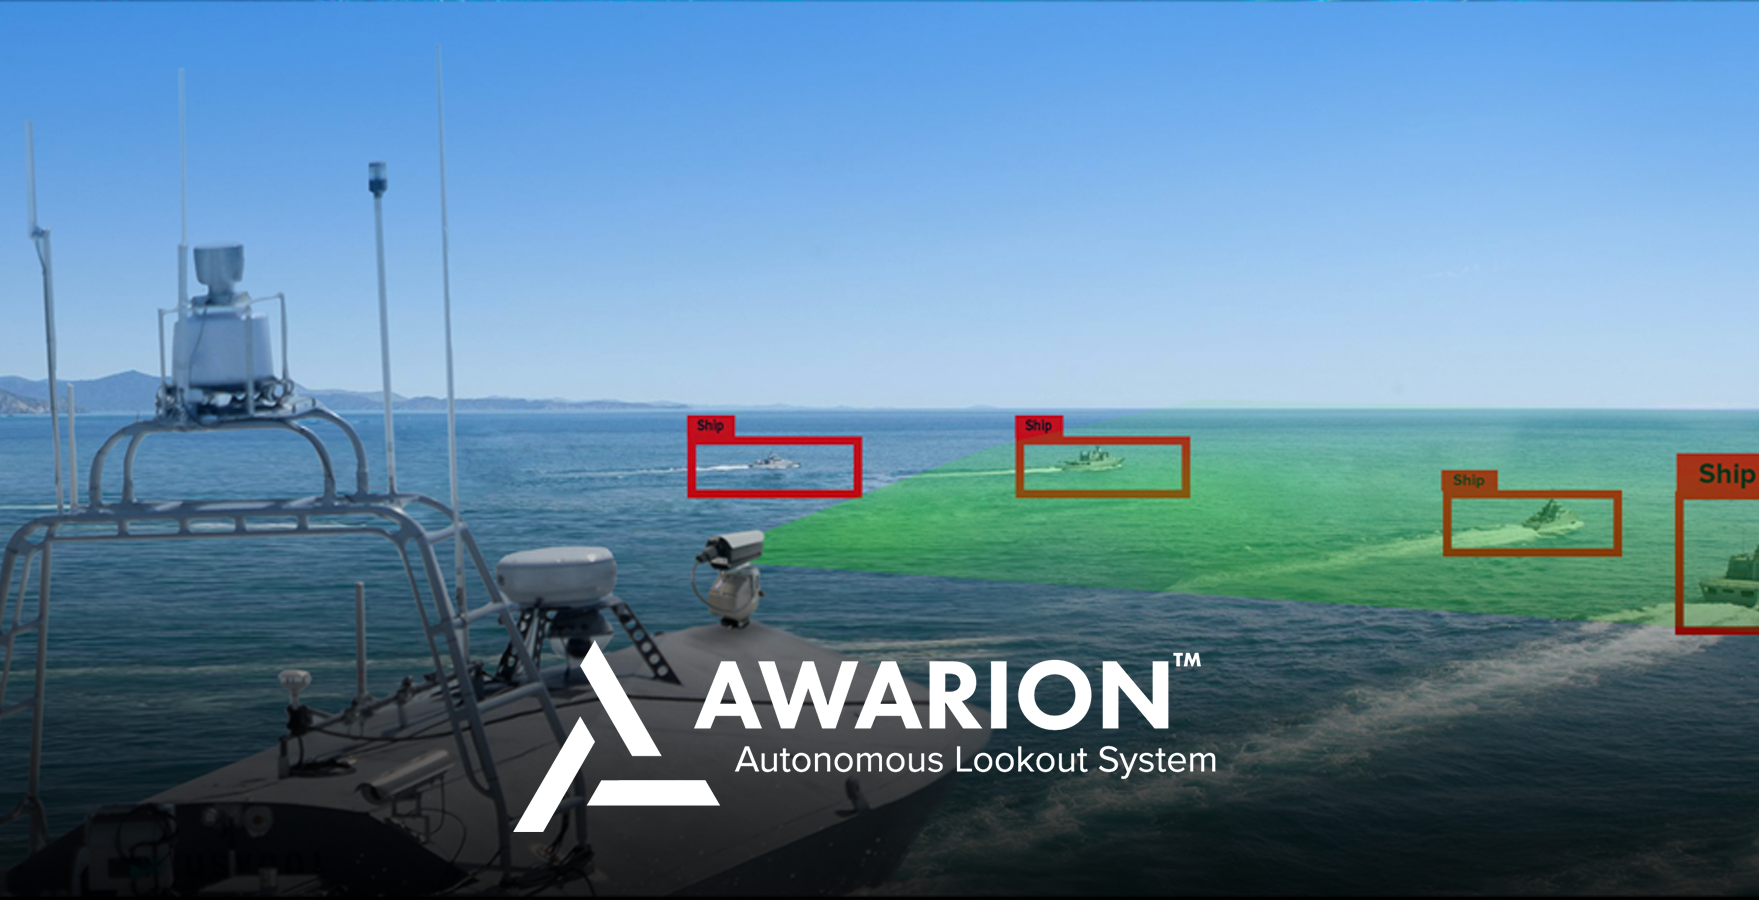 Awarion logo on image of boats on water.